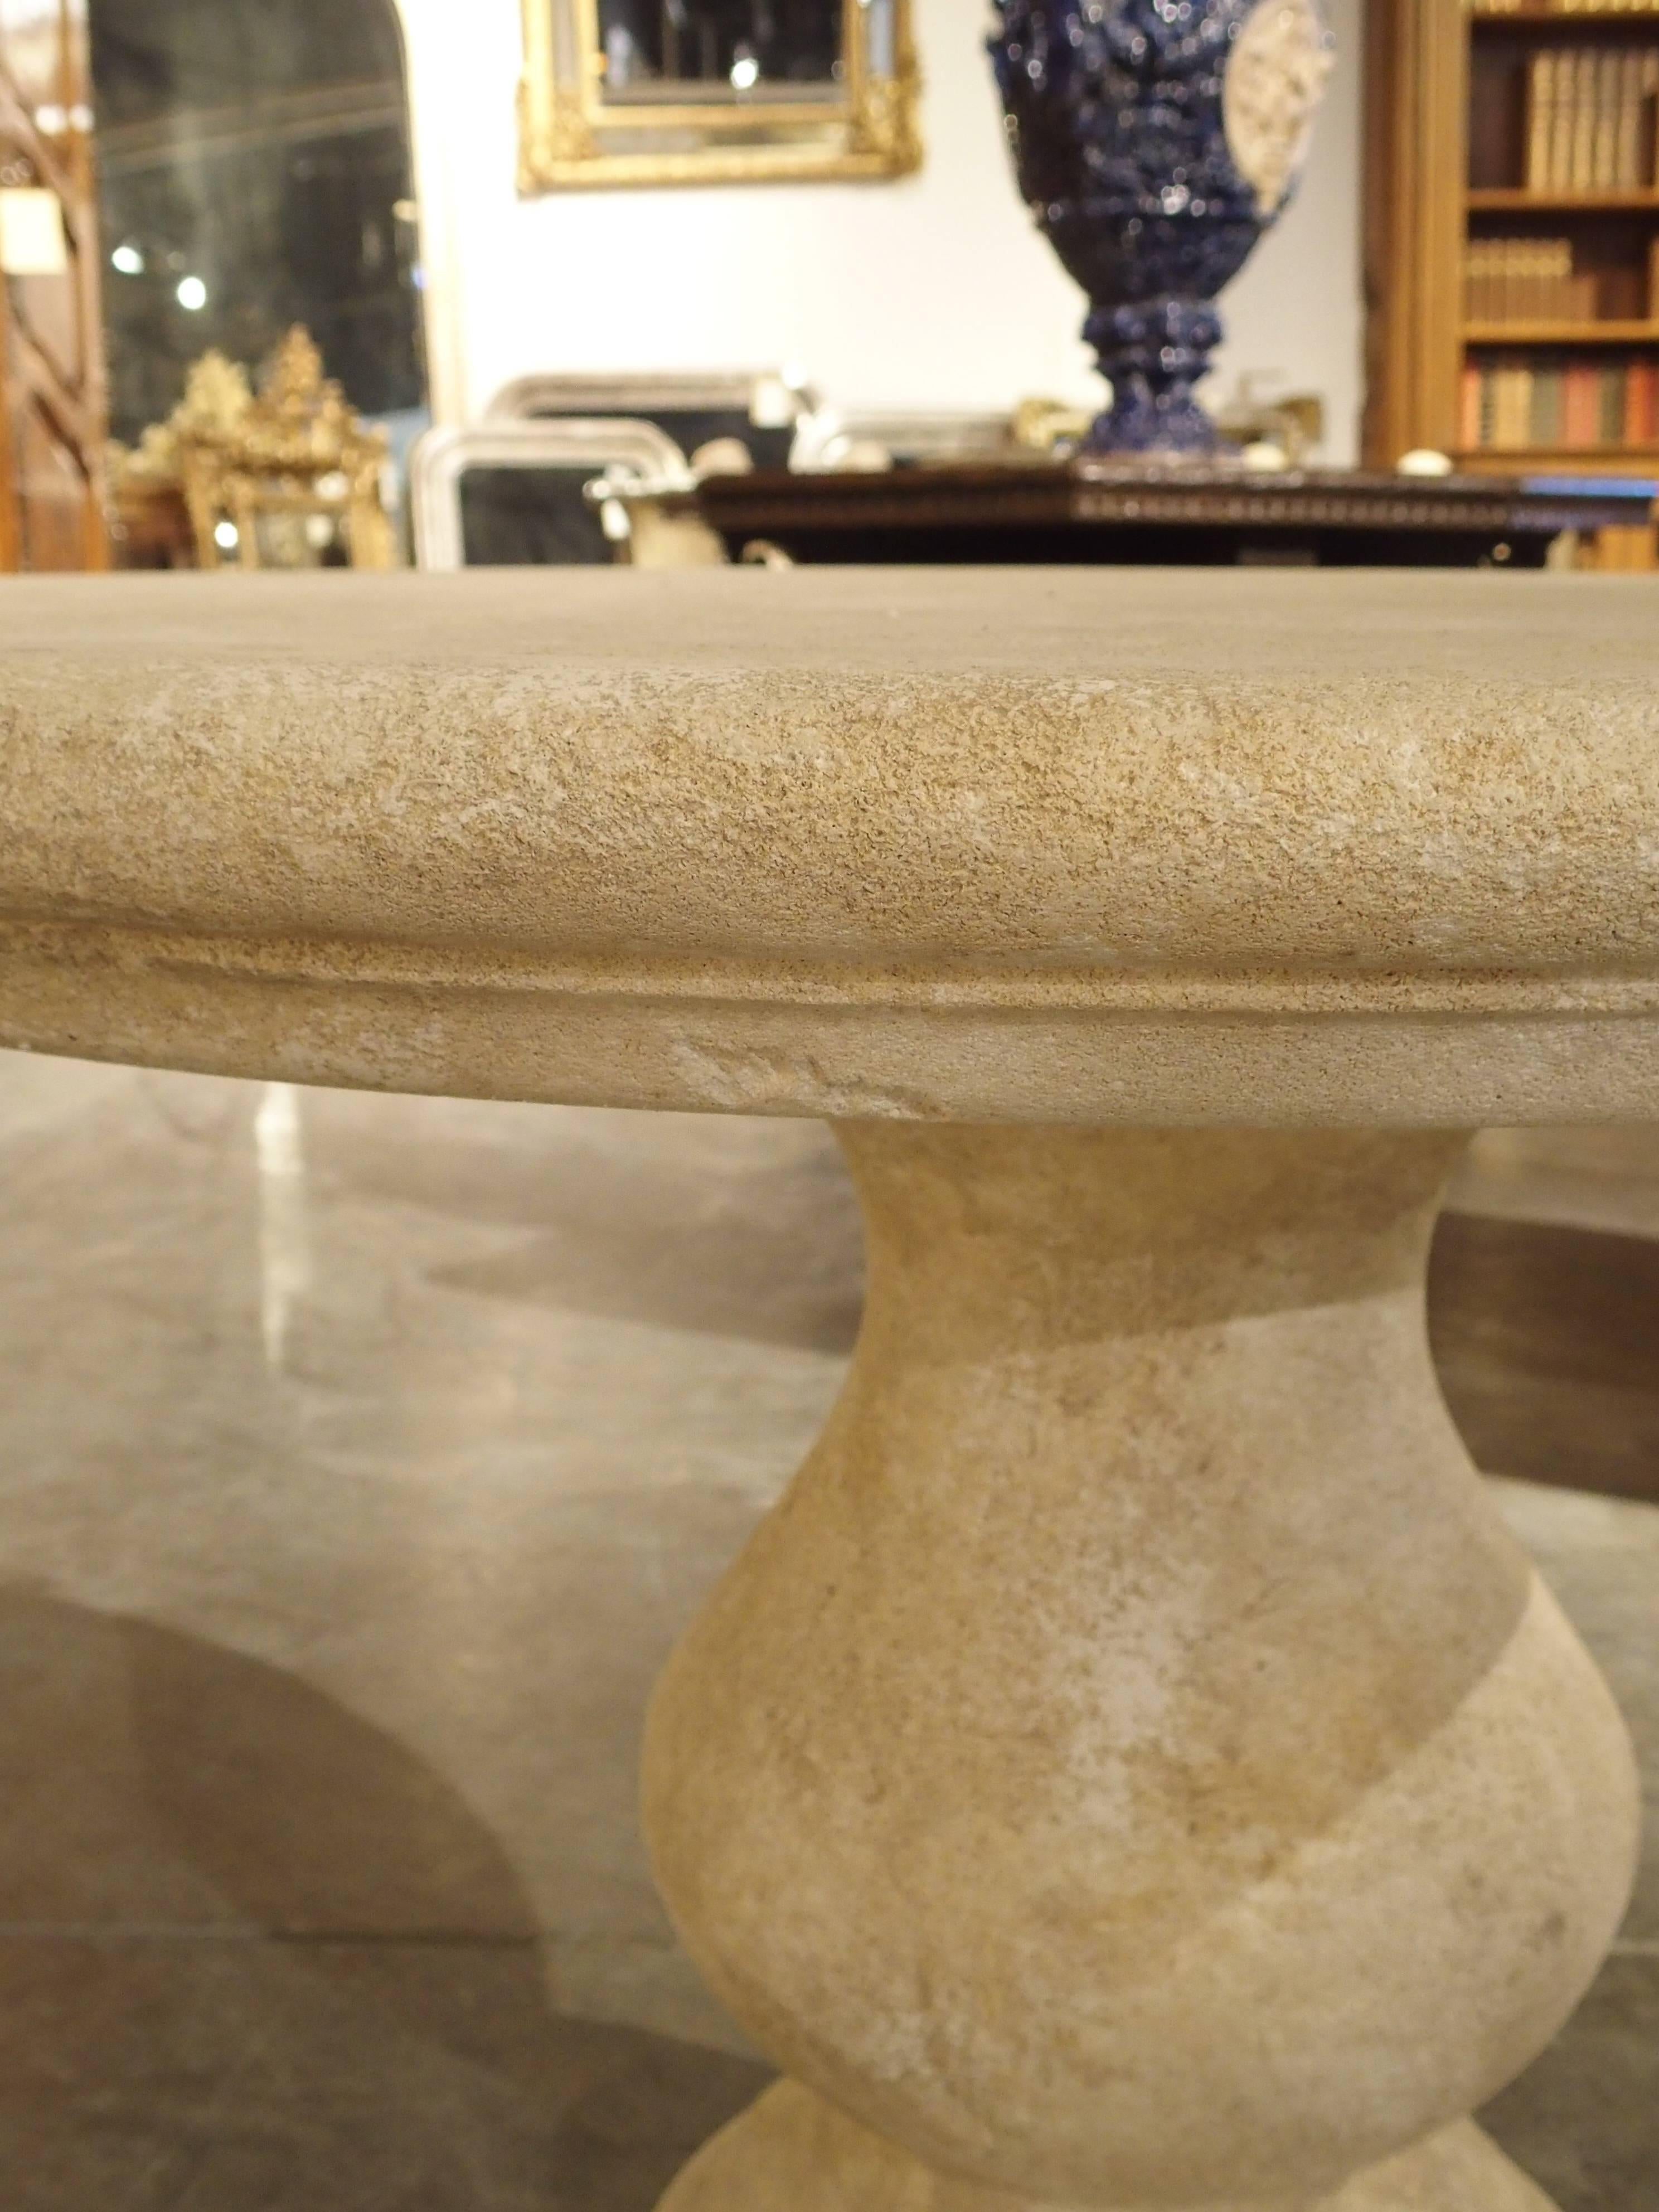 This versatile, hand-carved, round stone table from France can be used outside as well as inside. It is made of French estaillade limestone, which has been used for centuries in the creation of outdoor pieces. The rounded edge top sits on a large,